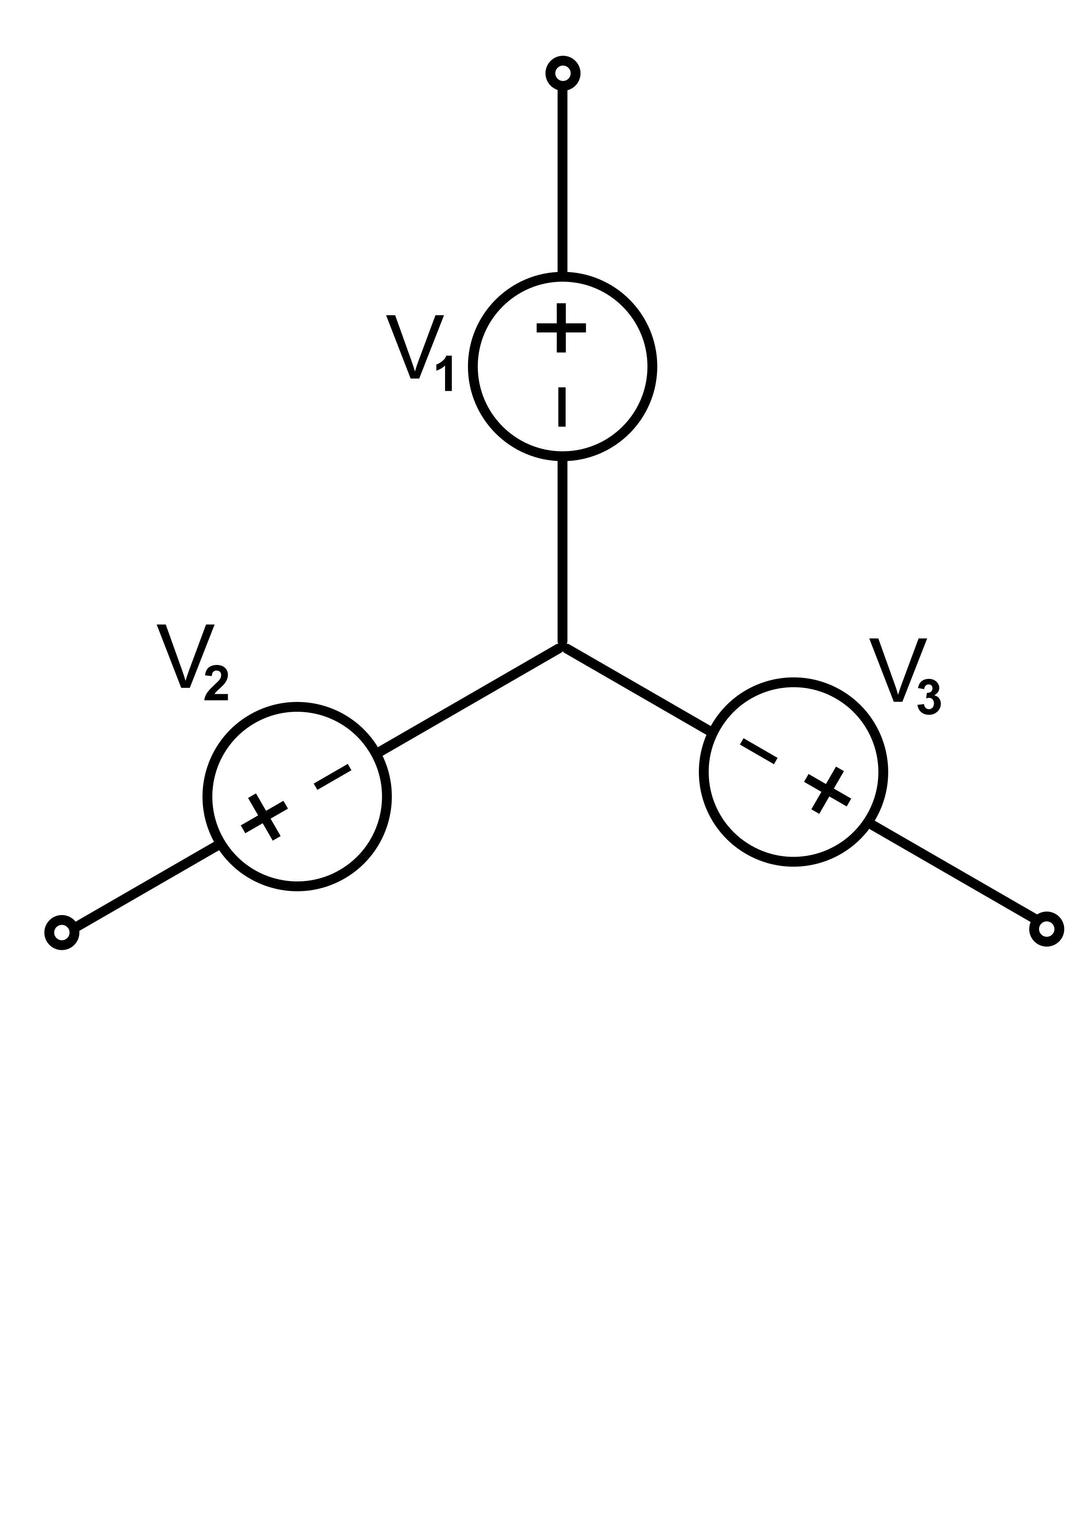 A Three-phase electric power png transparent